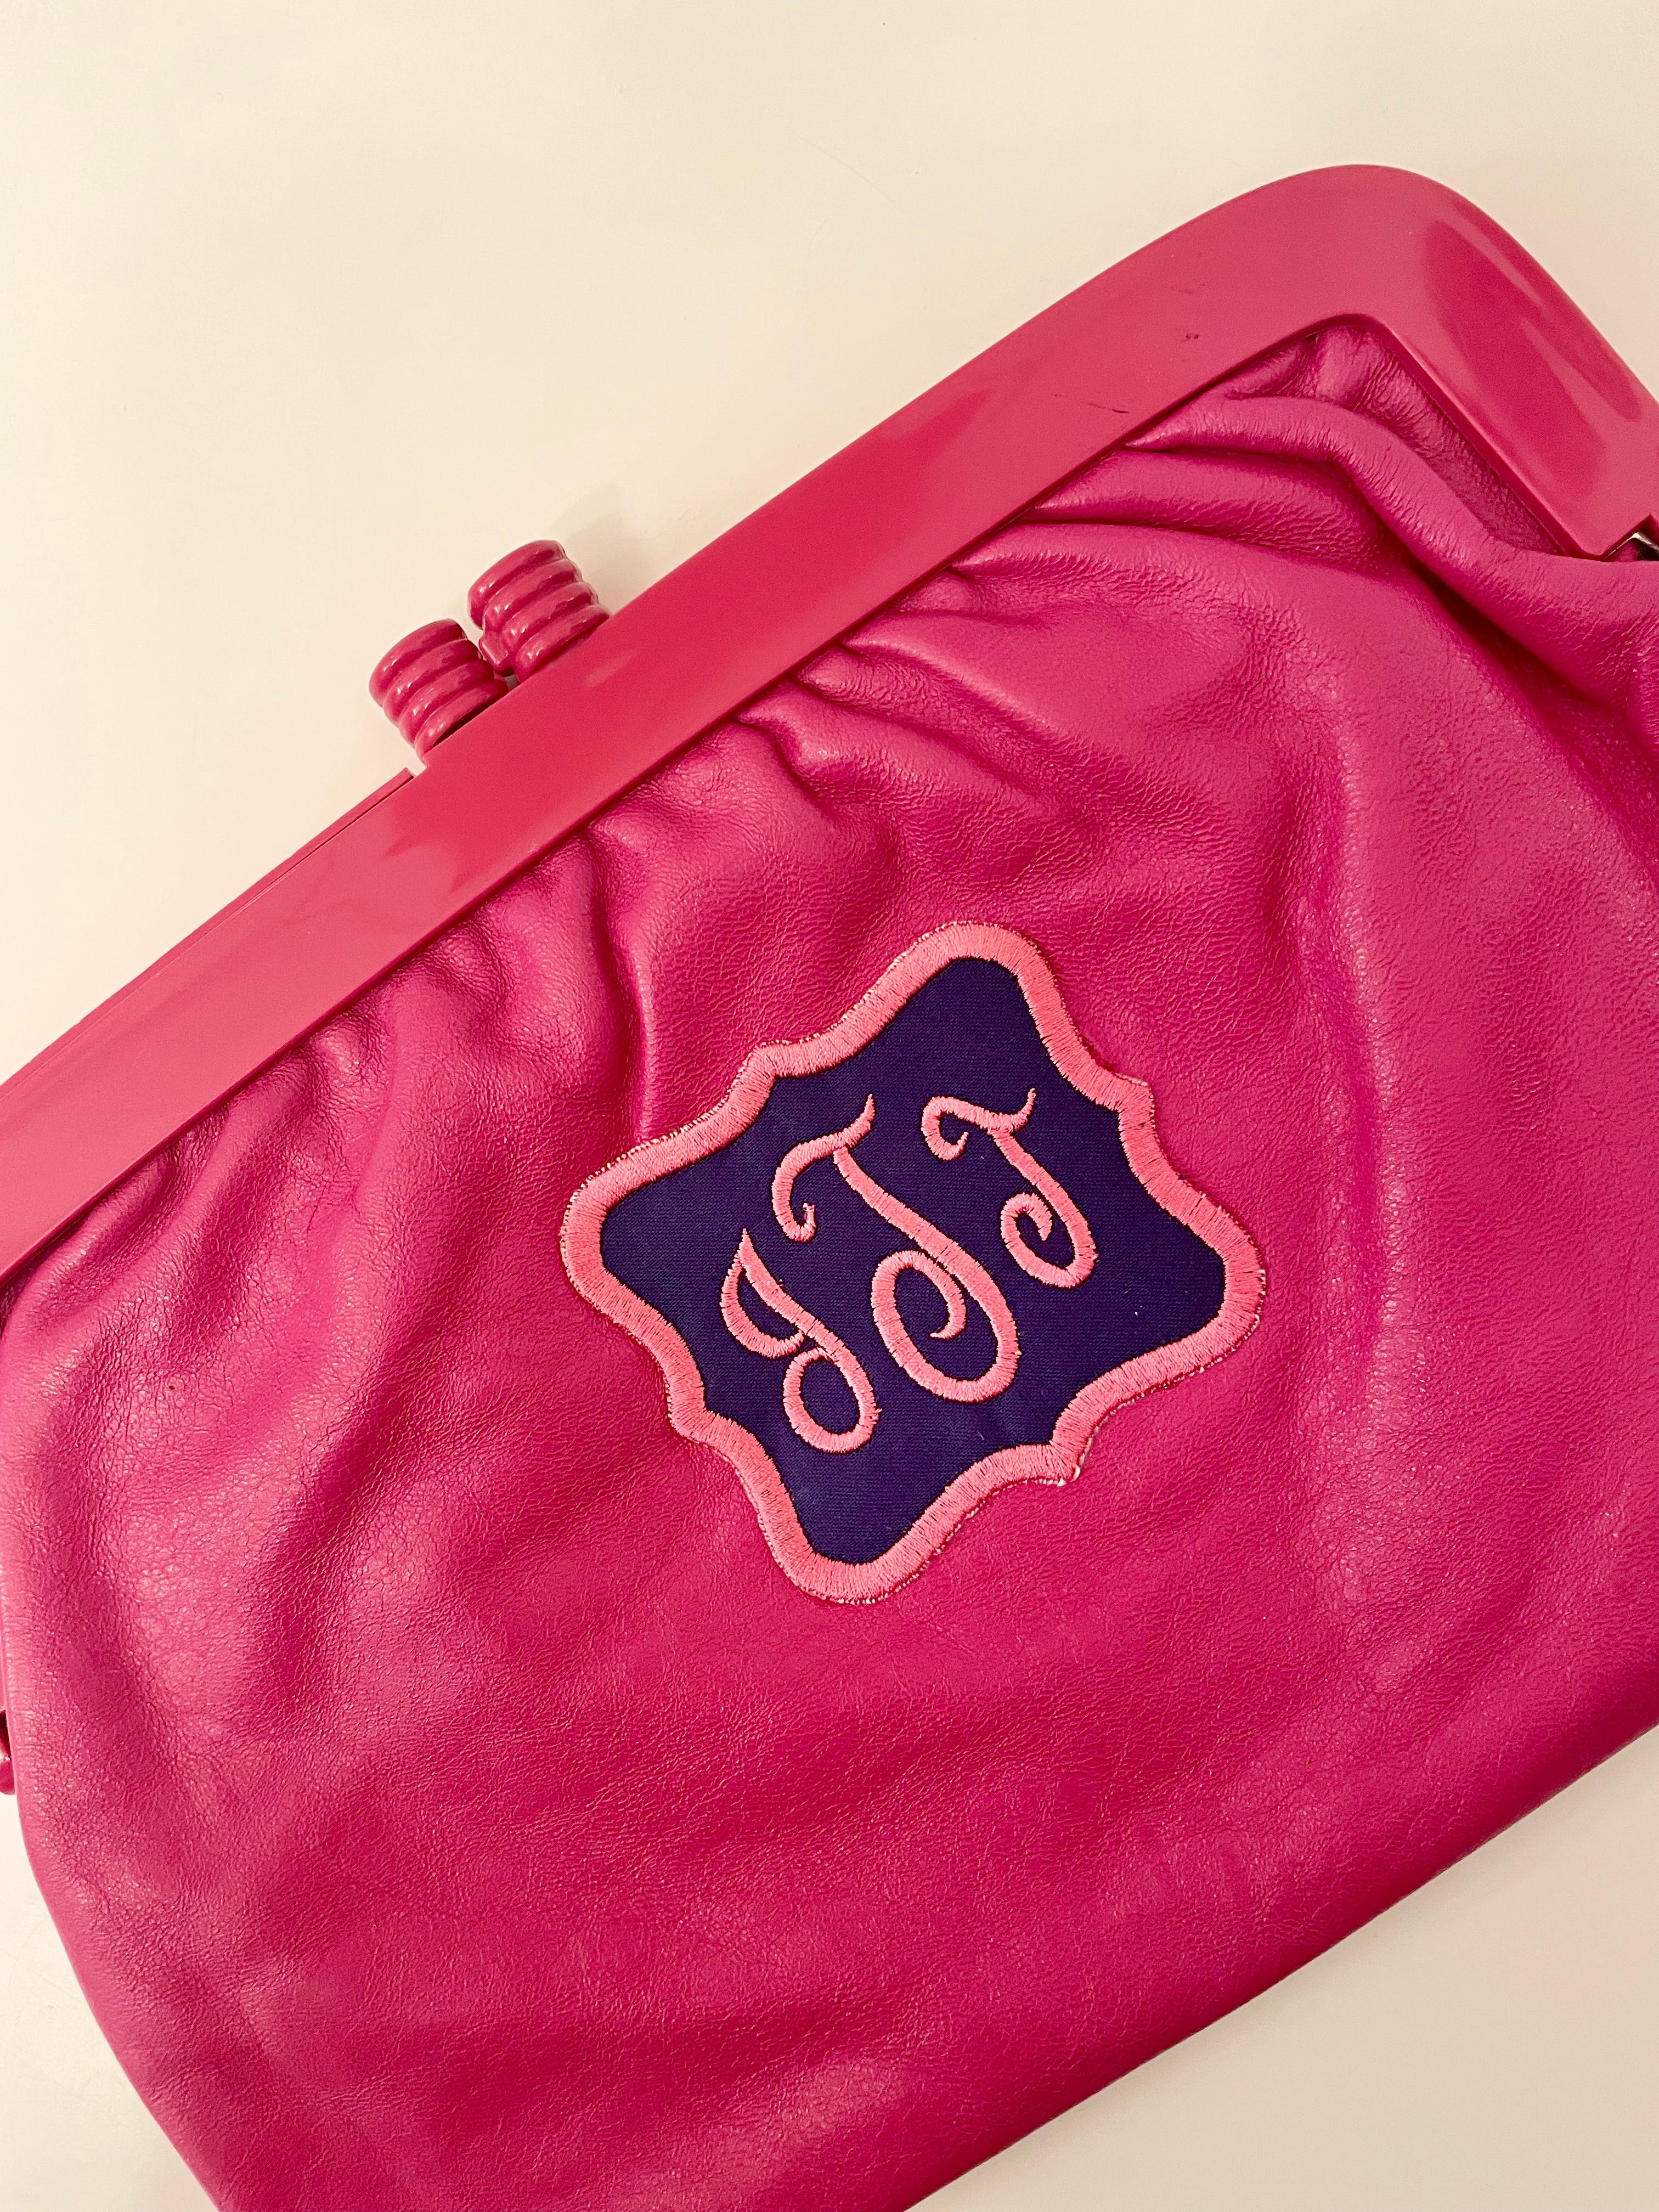 Ladies On Holiday... custom vintage clutch bags adorned with a monogram....